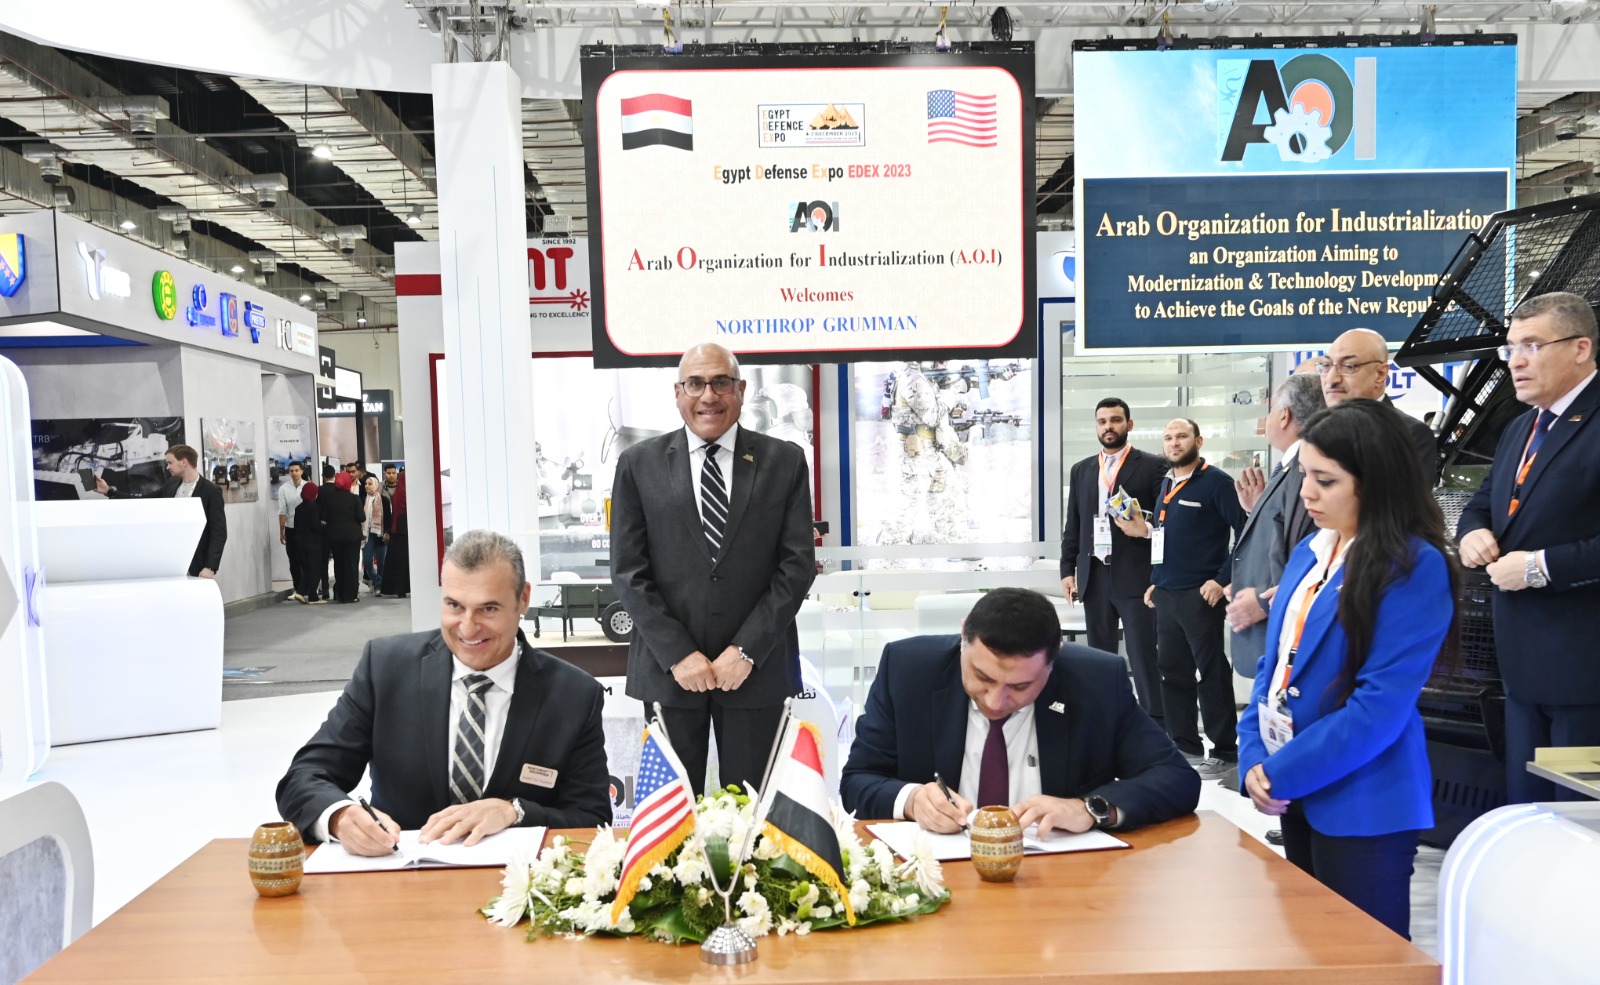 The AOI  welcomes serious partnerships Singing a memorandum of understanding with major American international companies